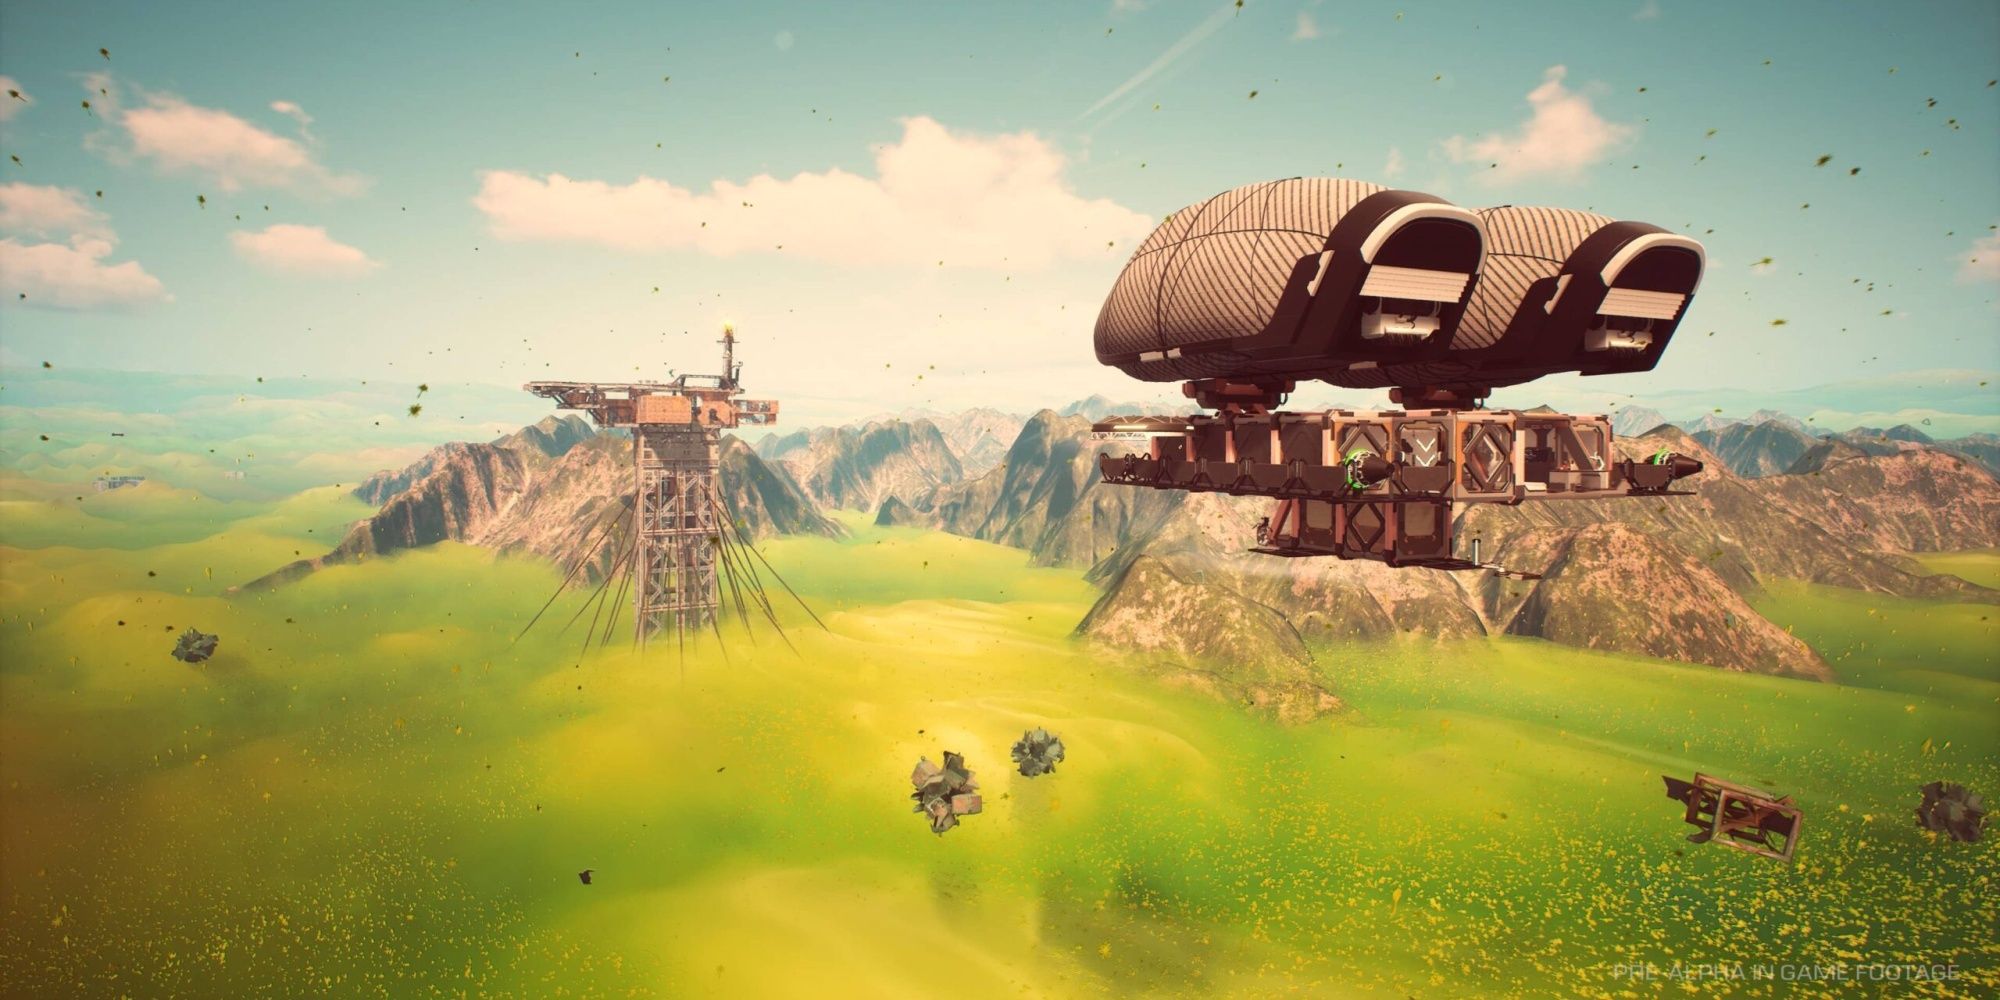 Forever Skies: A Player Made Airship Crossing The Toxic Landscape